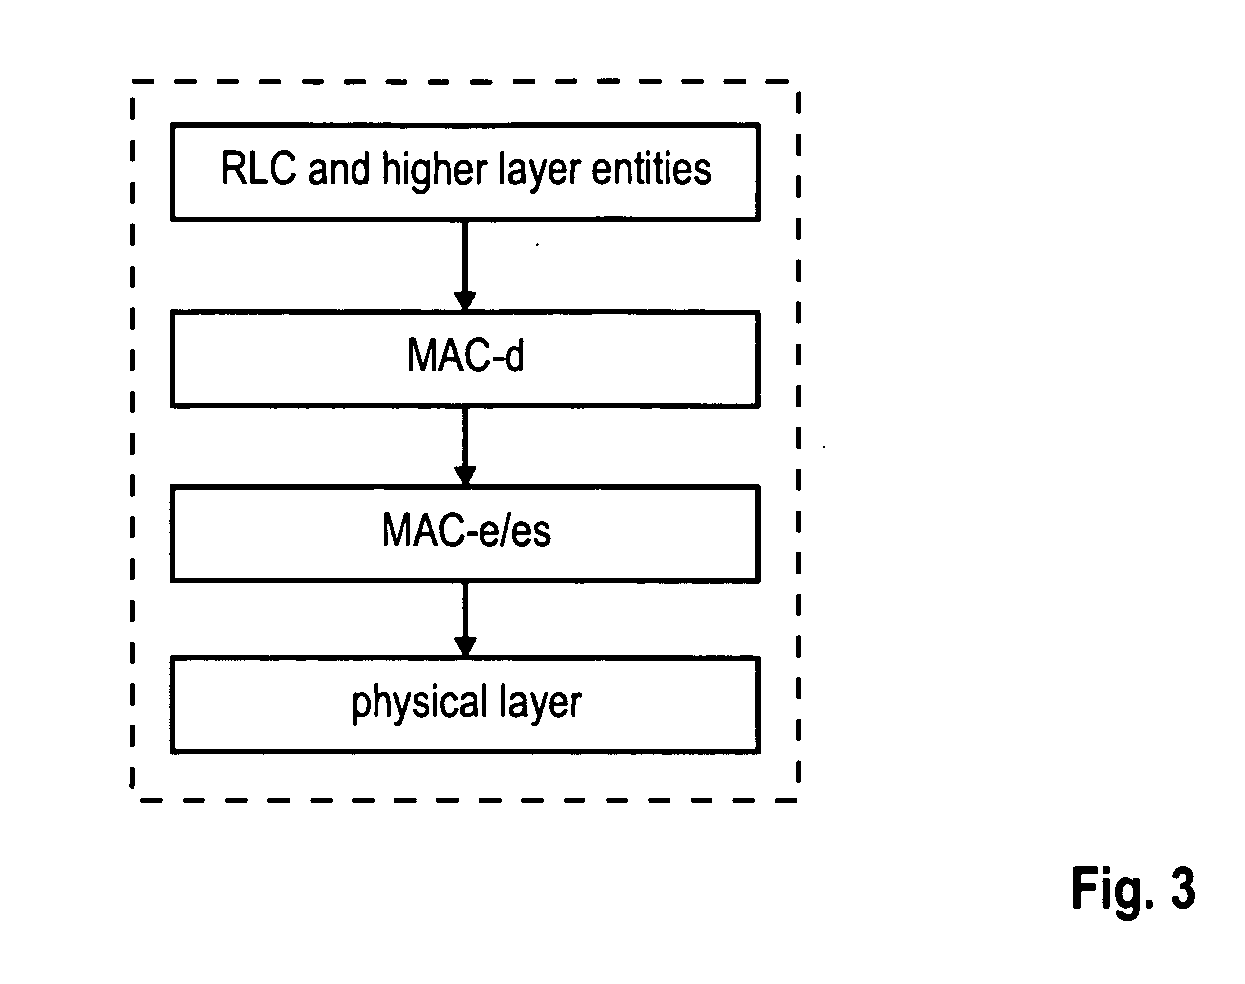 HARQ process restriction and transmission of non-scheduled control data via uplink channels